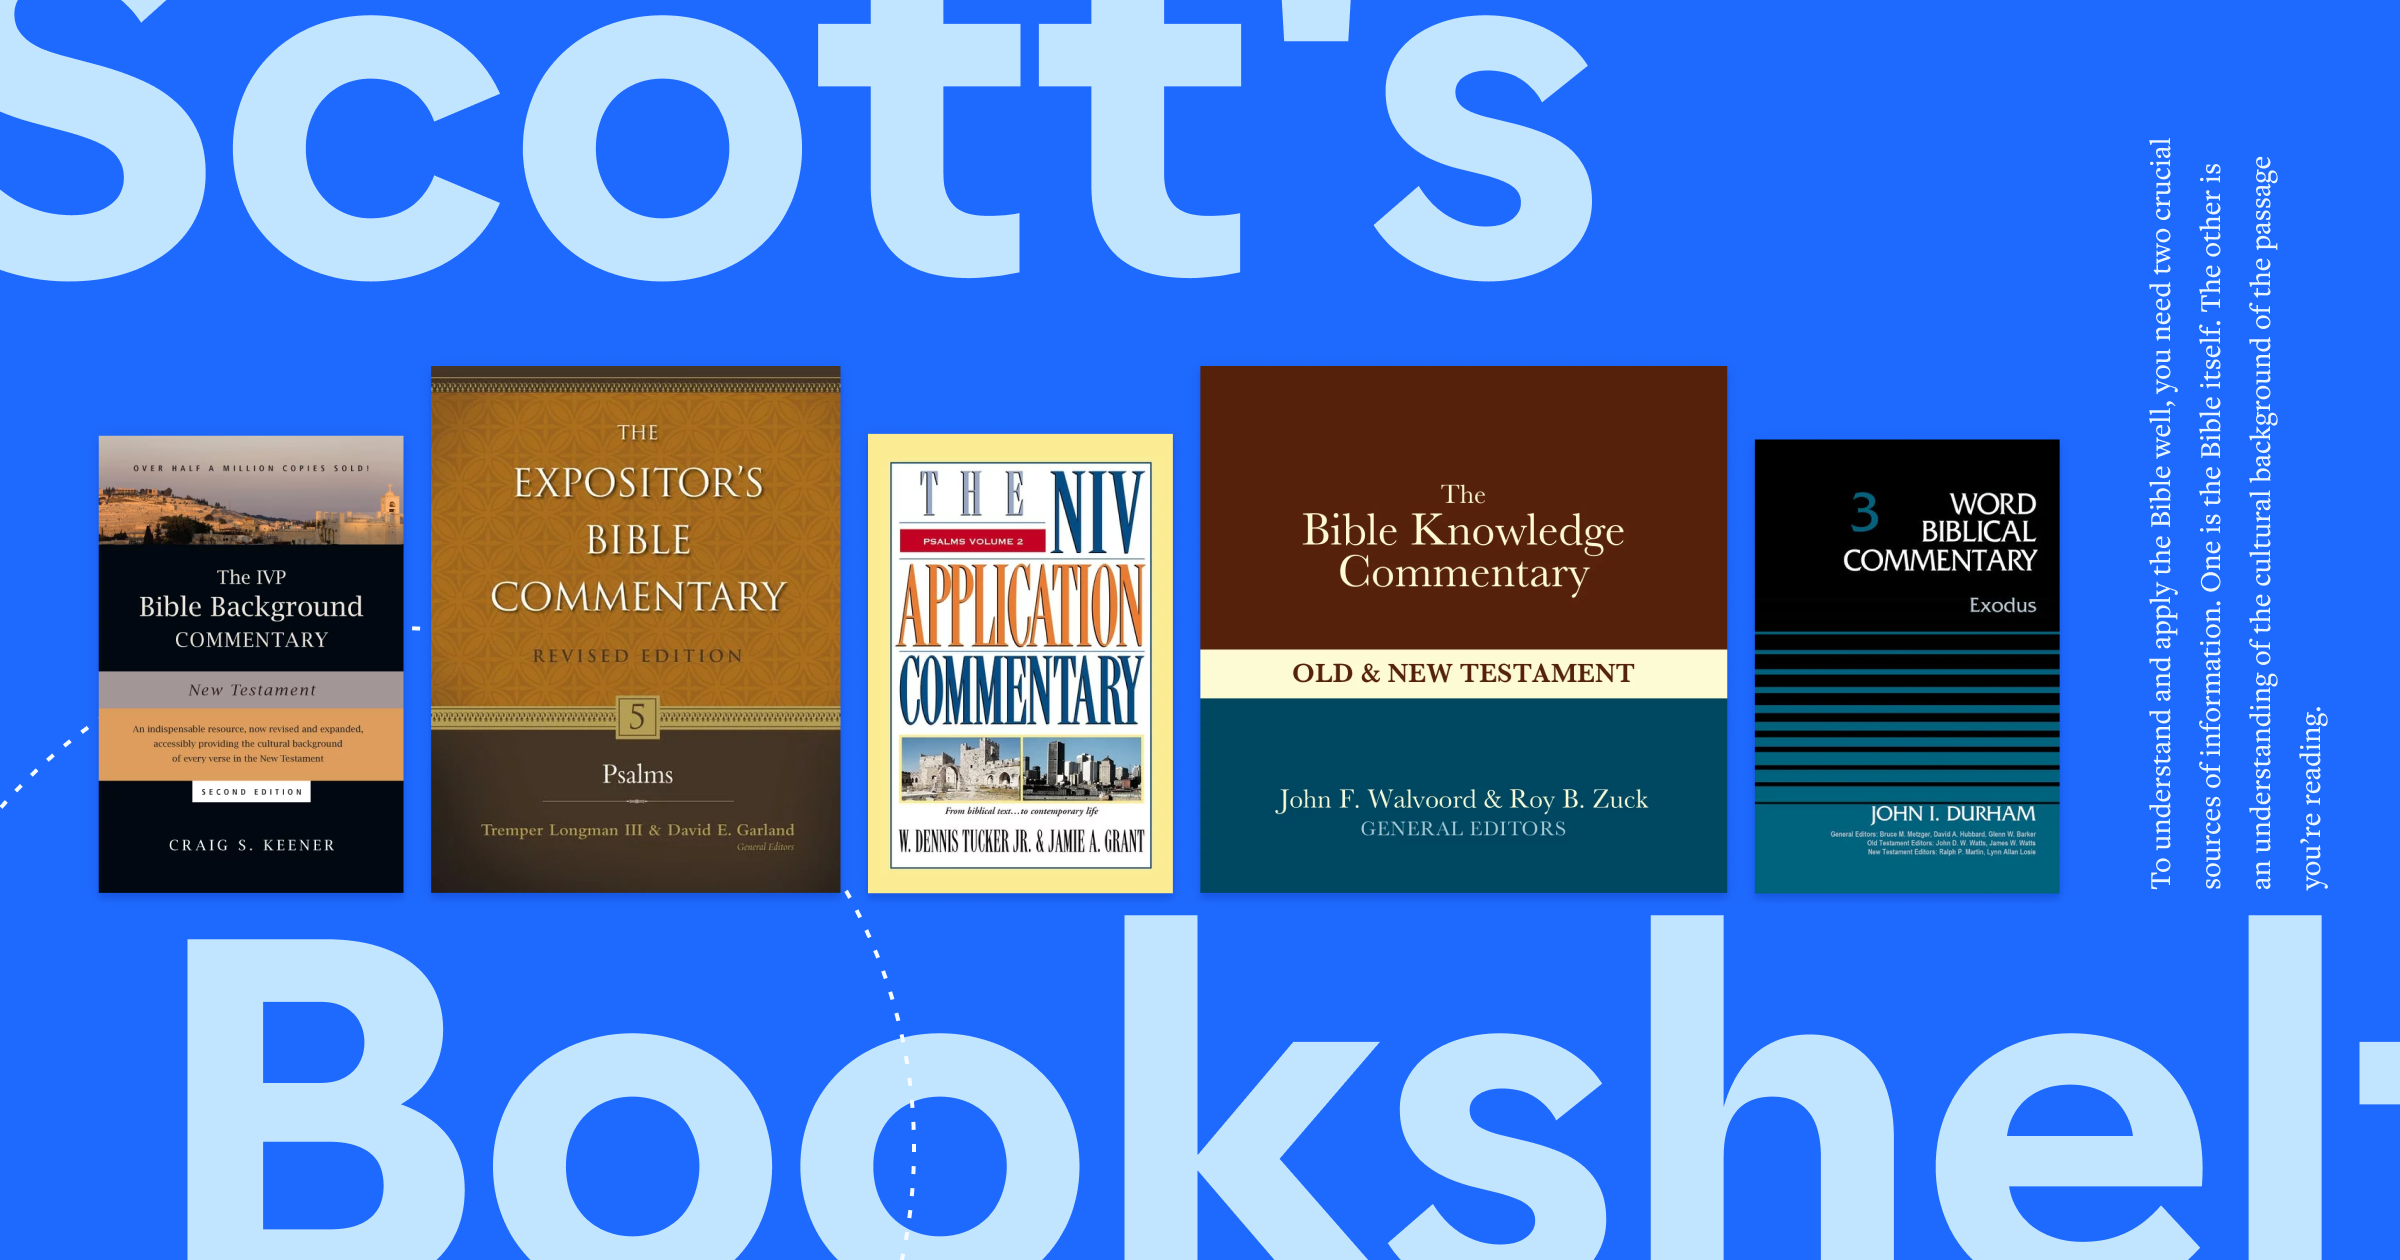 the words Scott's Bookshelf in large print with 5 featured books taken from the article in the center